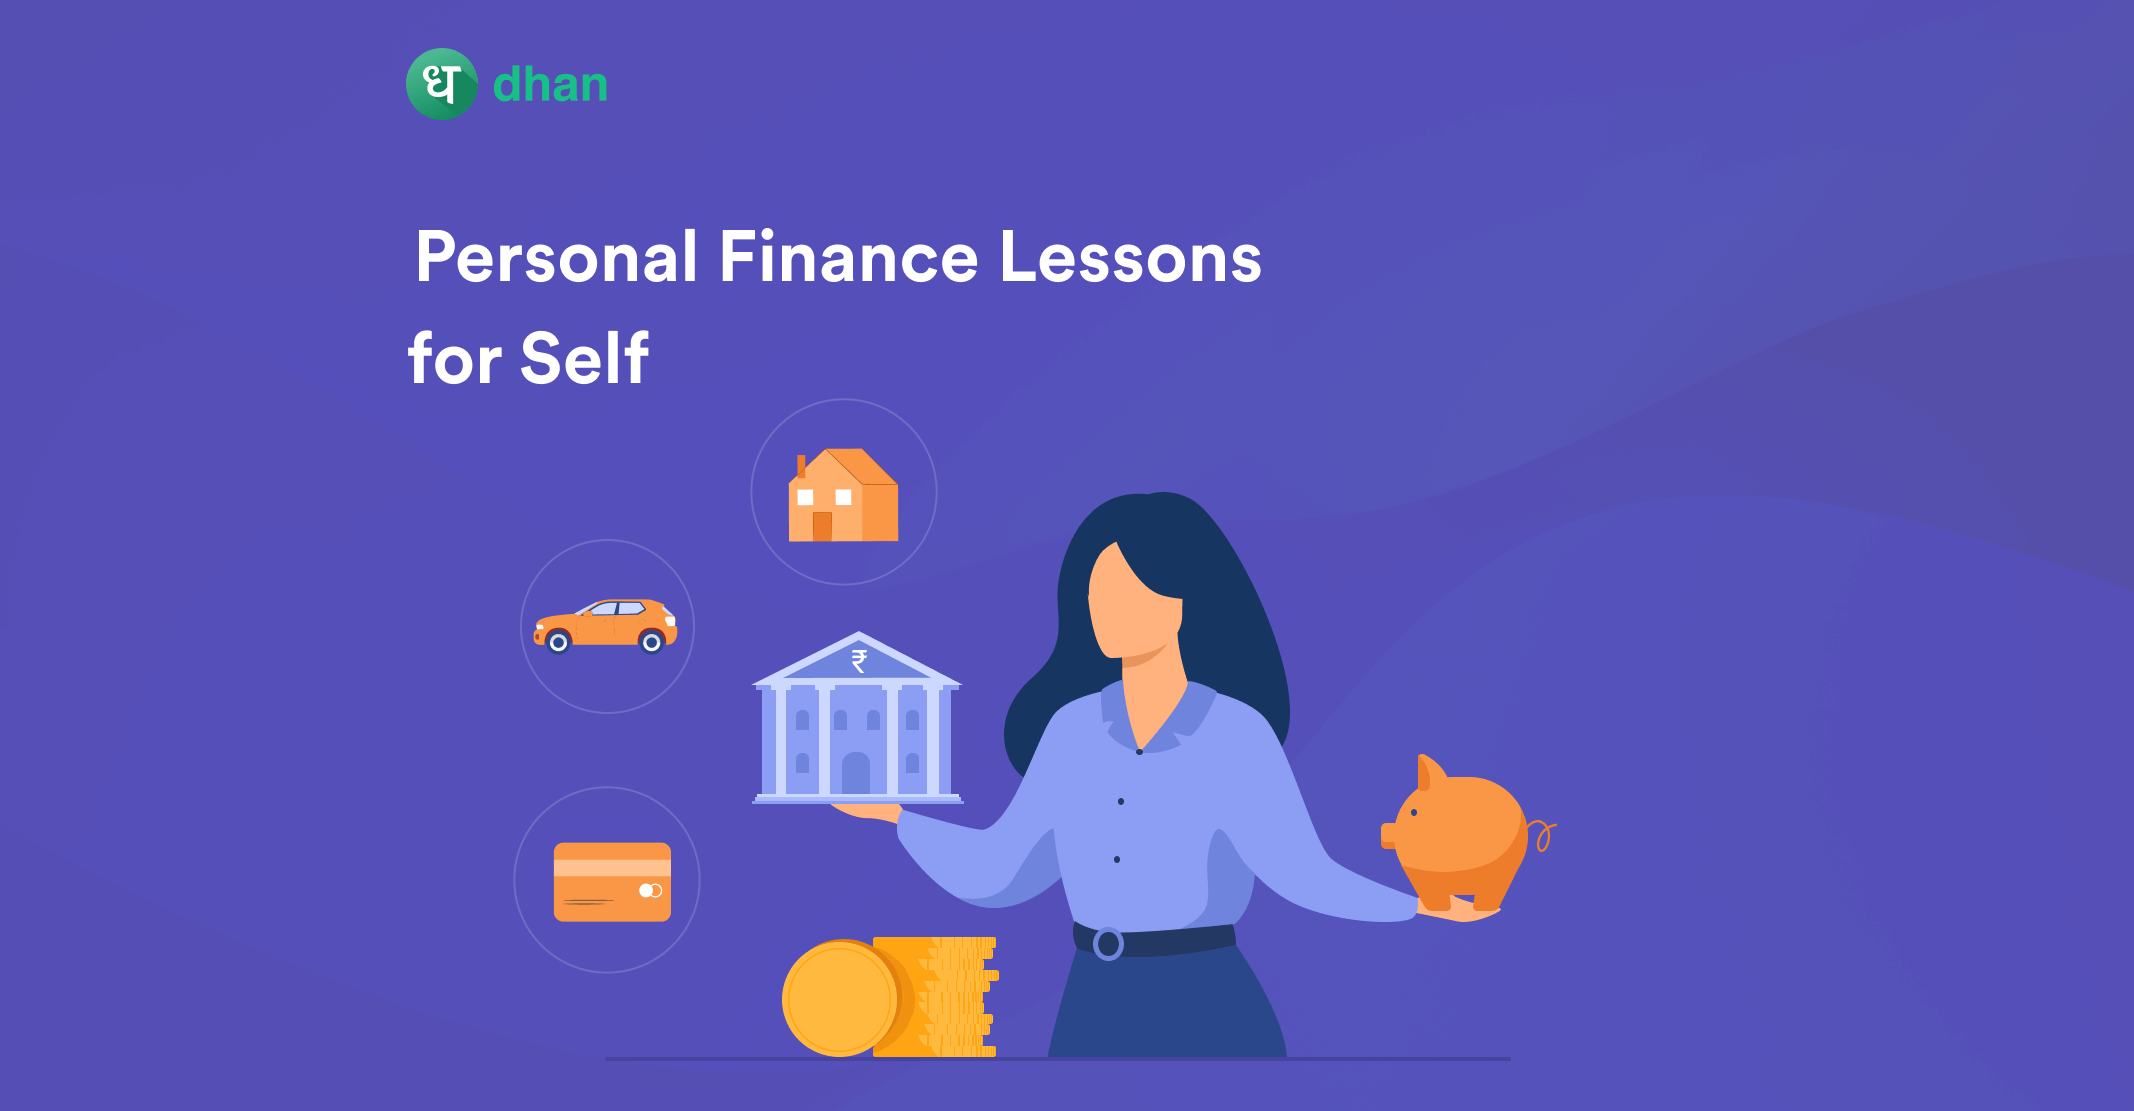 Top 10 Personal Finance Lessons for Self